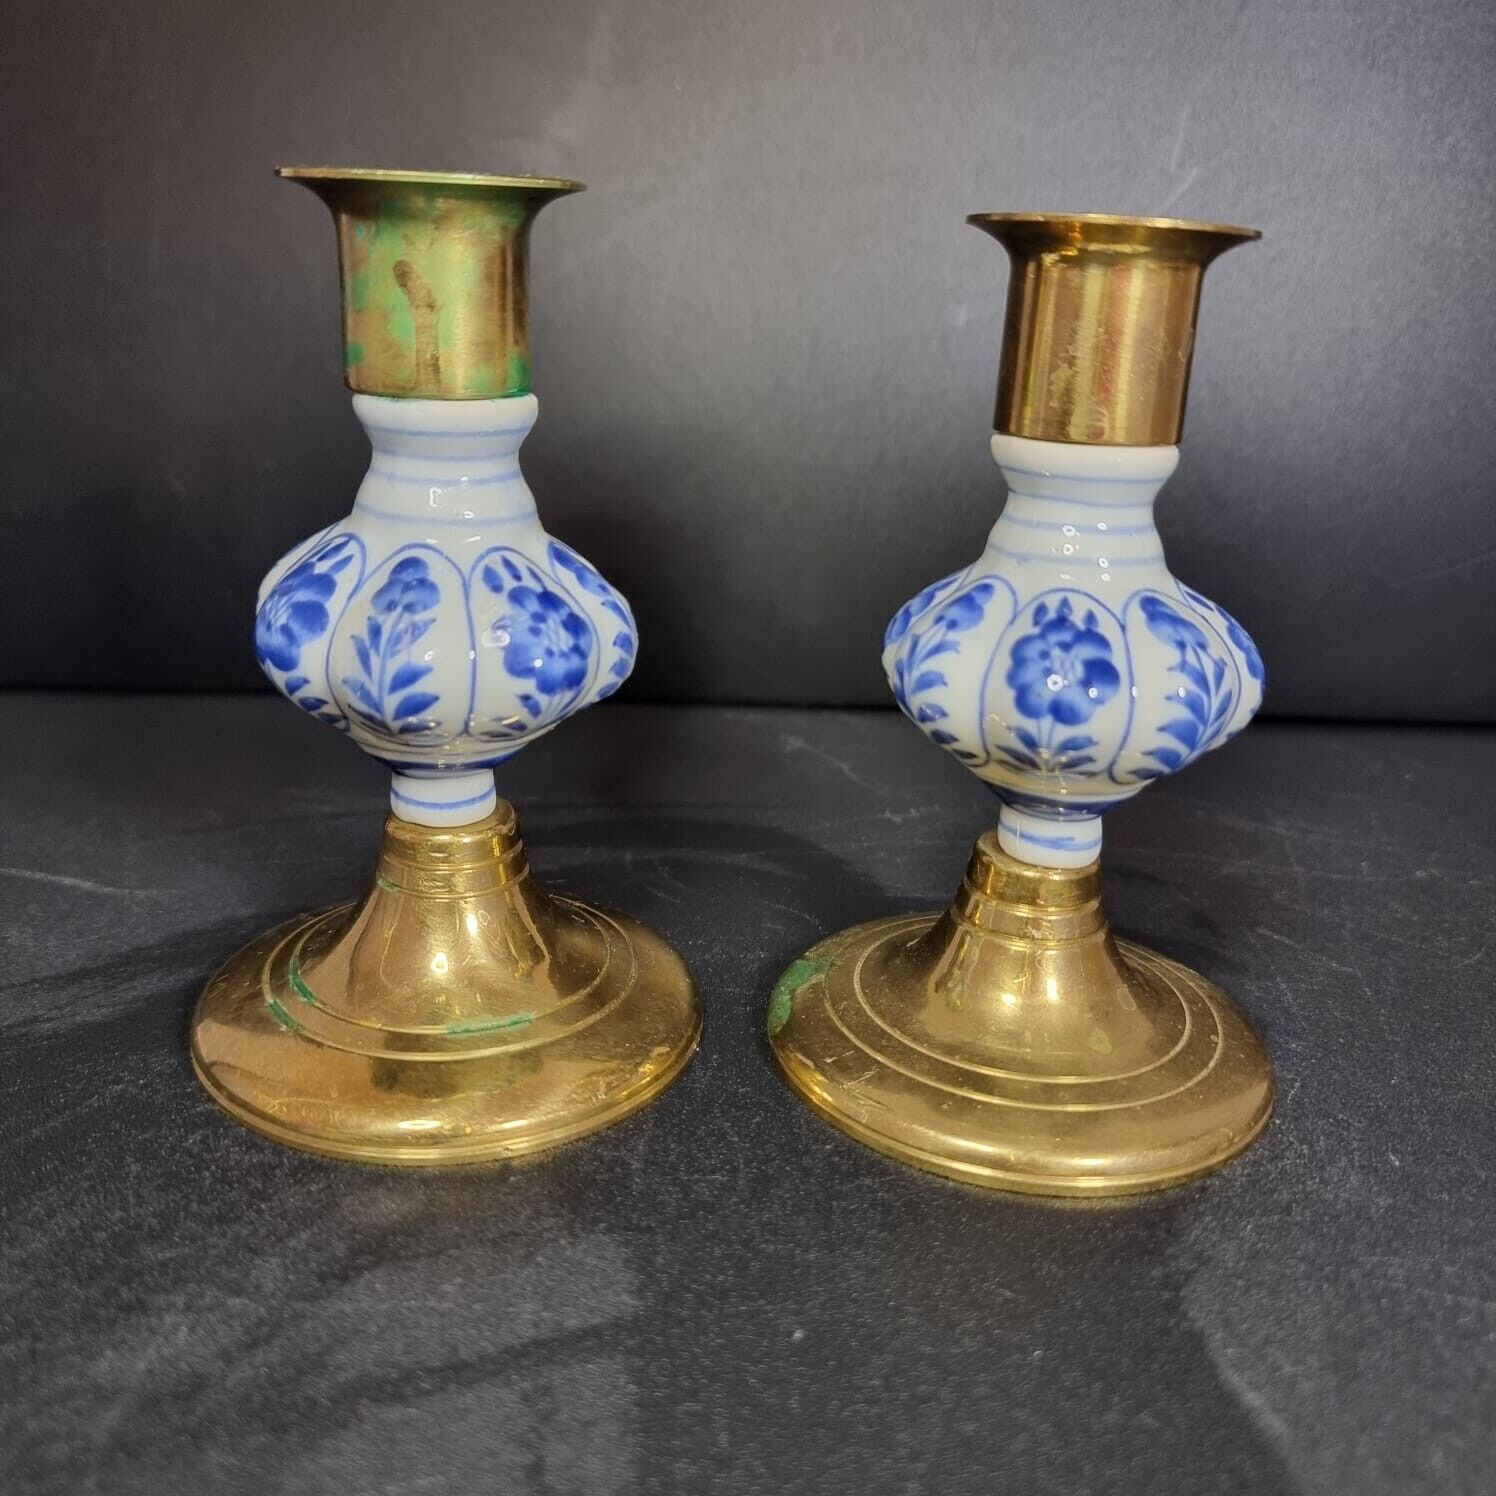 Vintage Delft Style Porcelain and Brass Candlestick Holders, a Pair